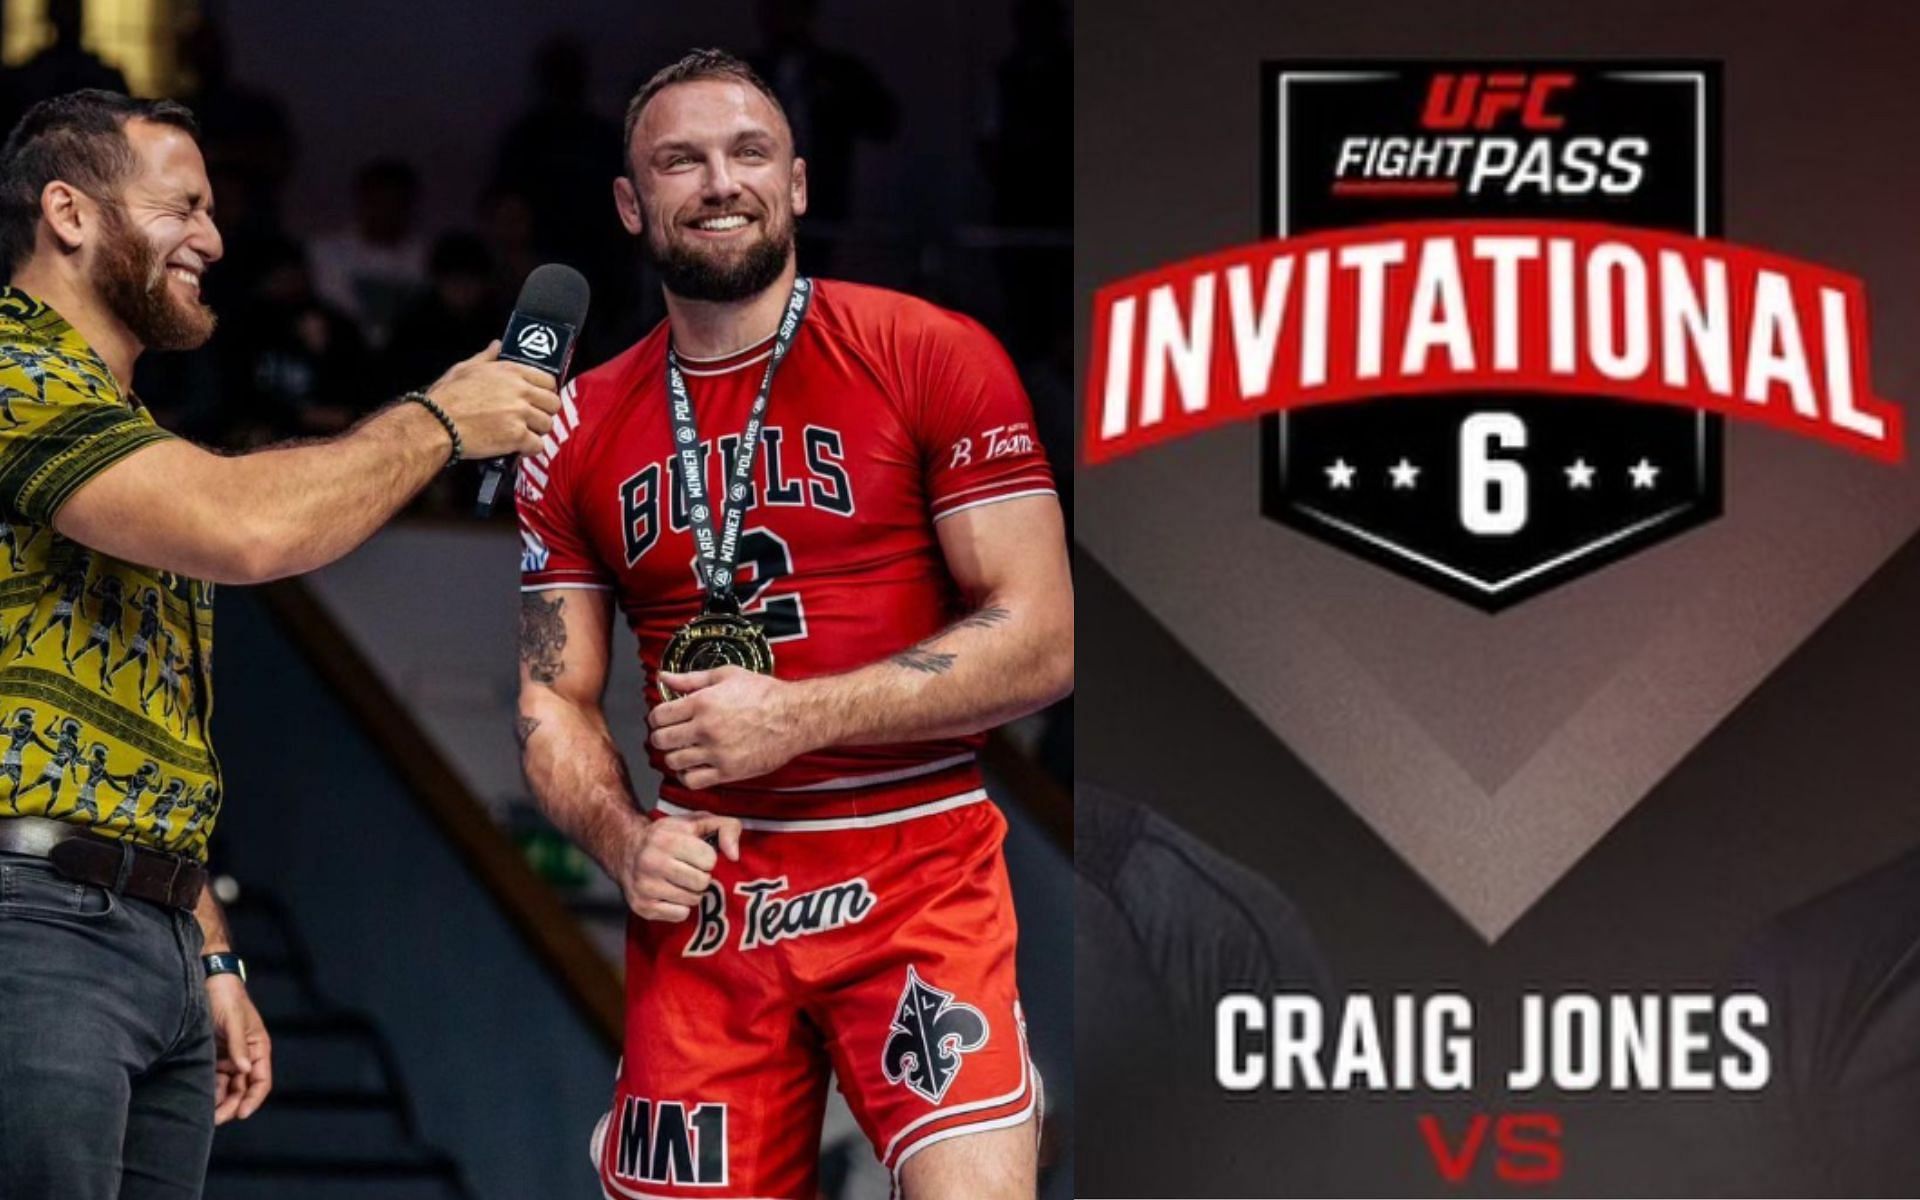 Craig Jones (middle left) set to face former Bellator champion and BJJ world champ at submission grappling event in March [Images Courtesy: @craigjonesbjj on Instagram]